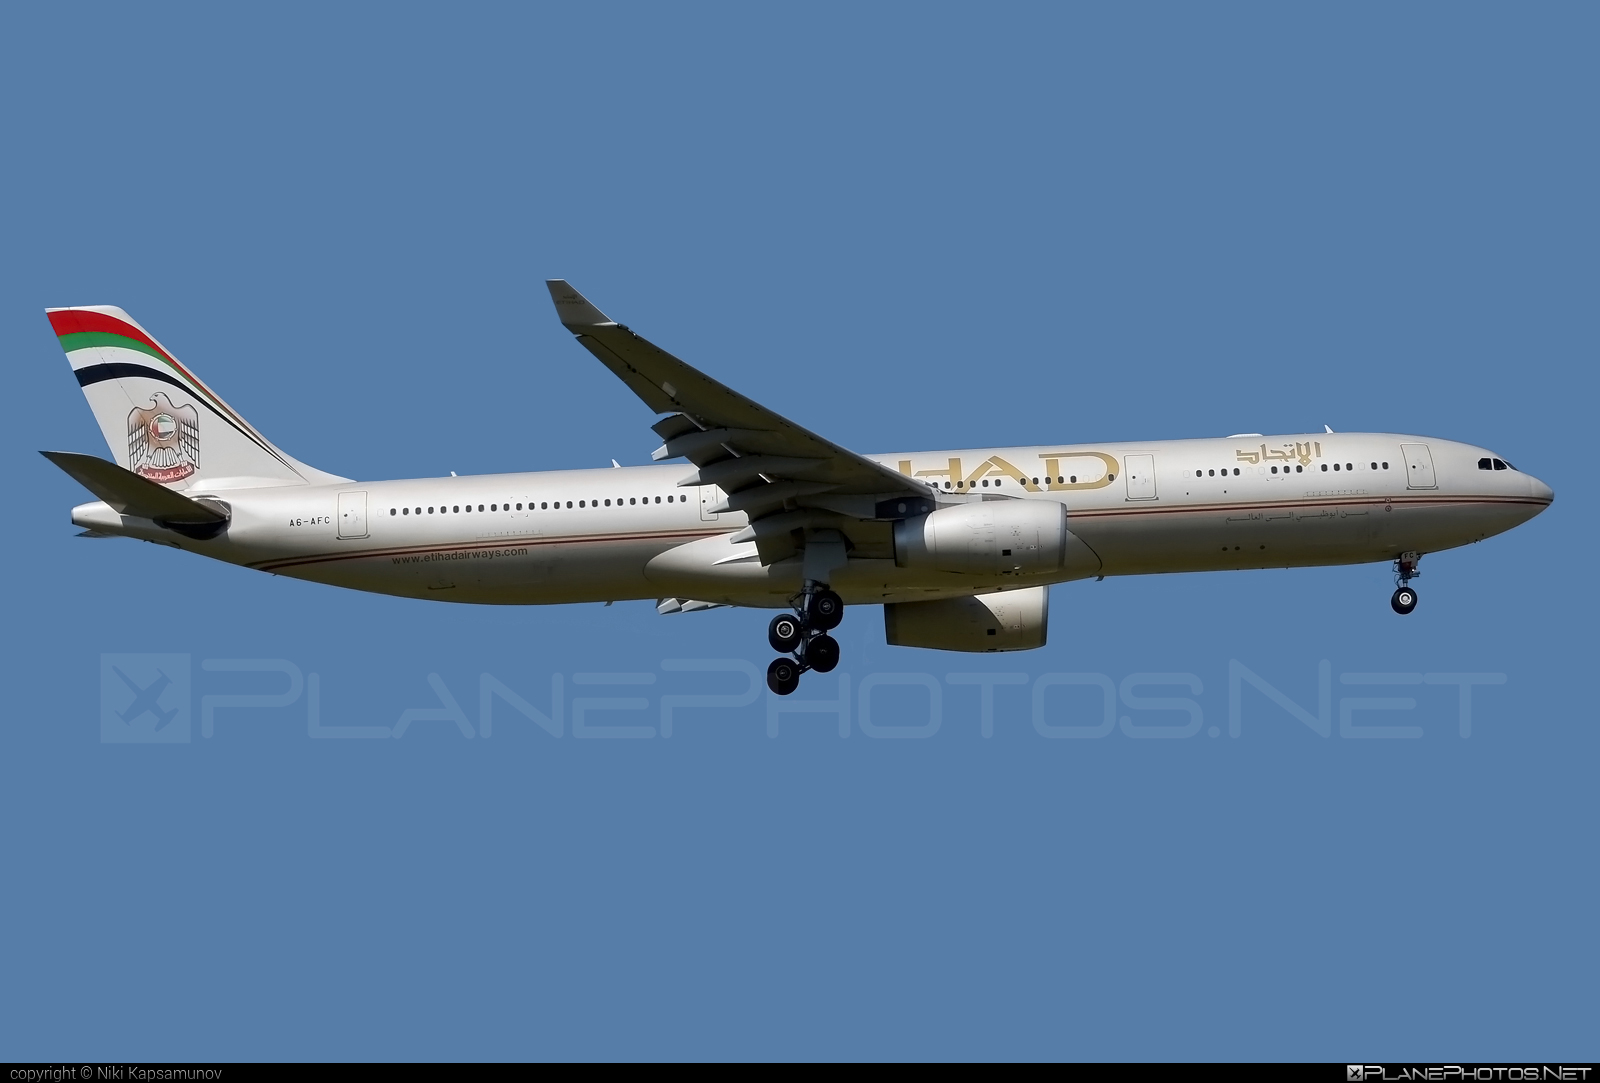 Airbus A330-343E - A6-AFC operated by Etihad Airways #a330 #a330e #a330family #airbus #airbus330 #etihad #etihadairways